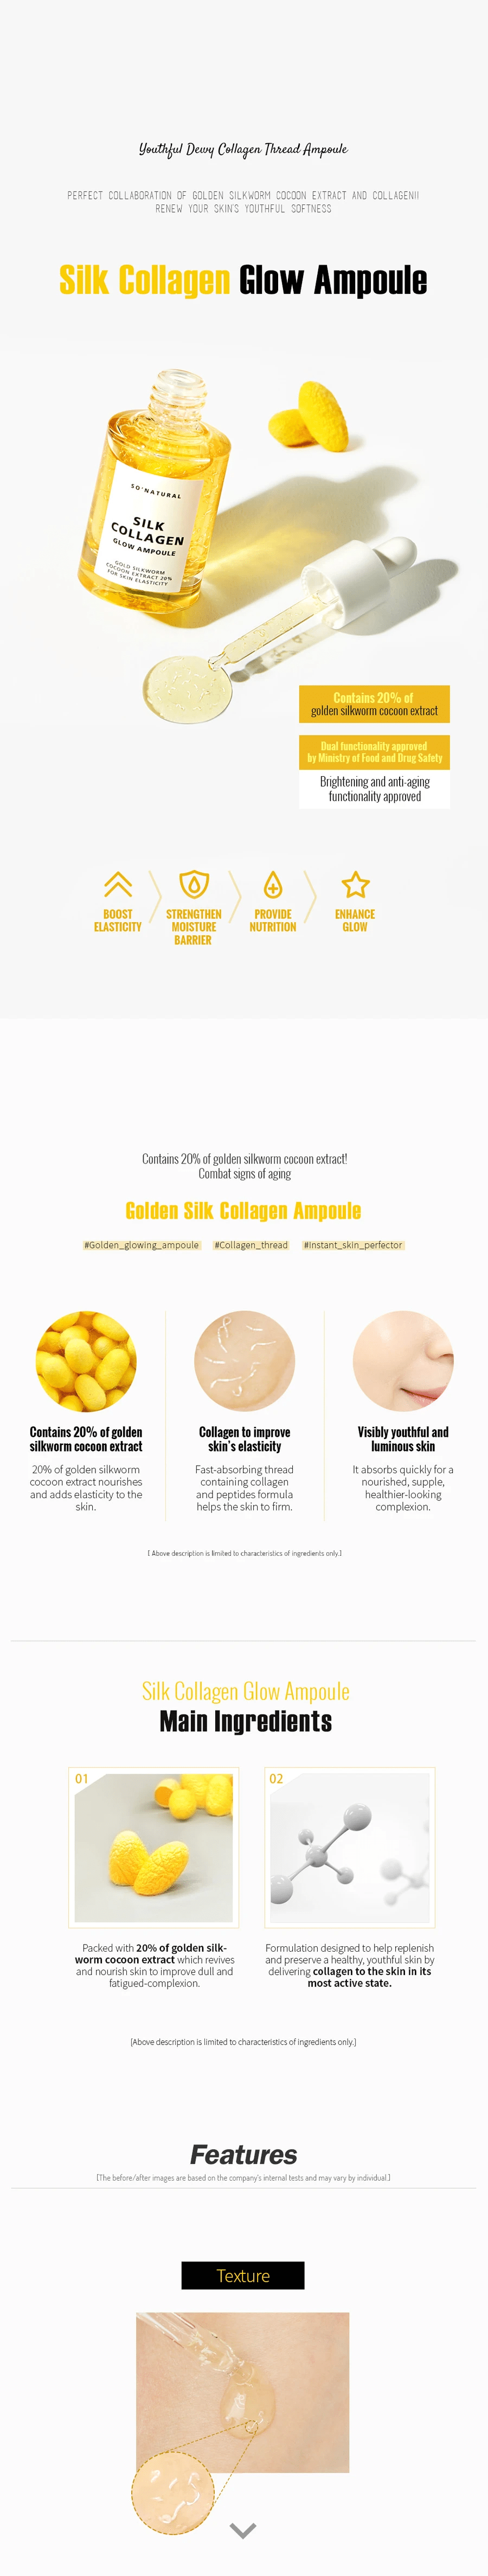 so natural Silk Collagen Glow Ampoule - eCosmeticWorld